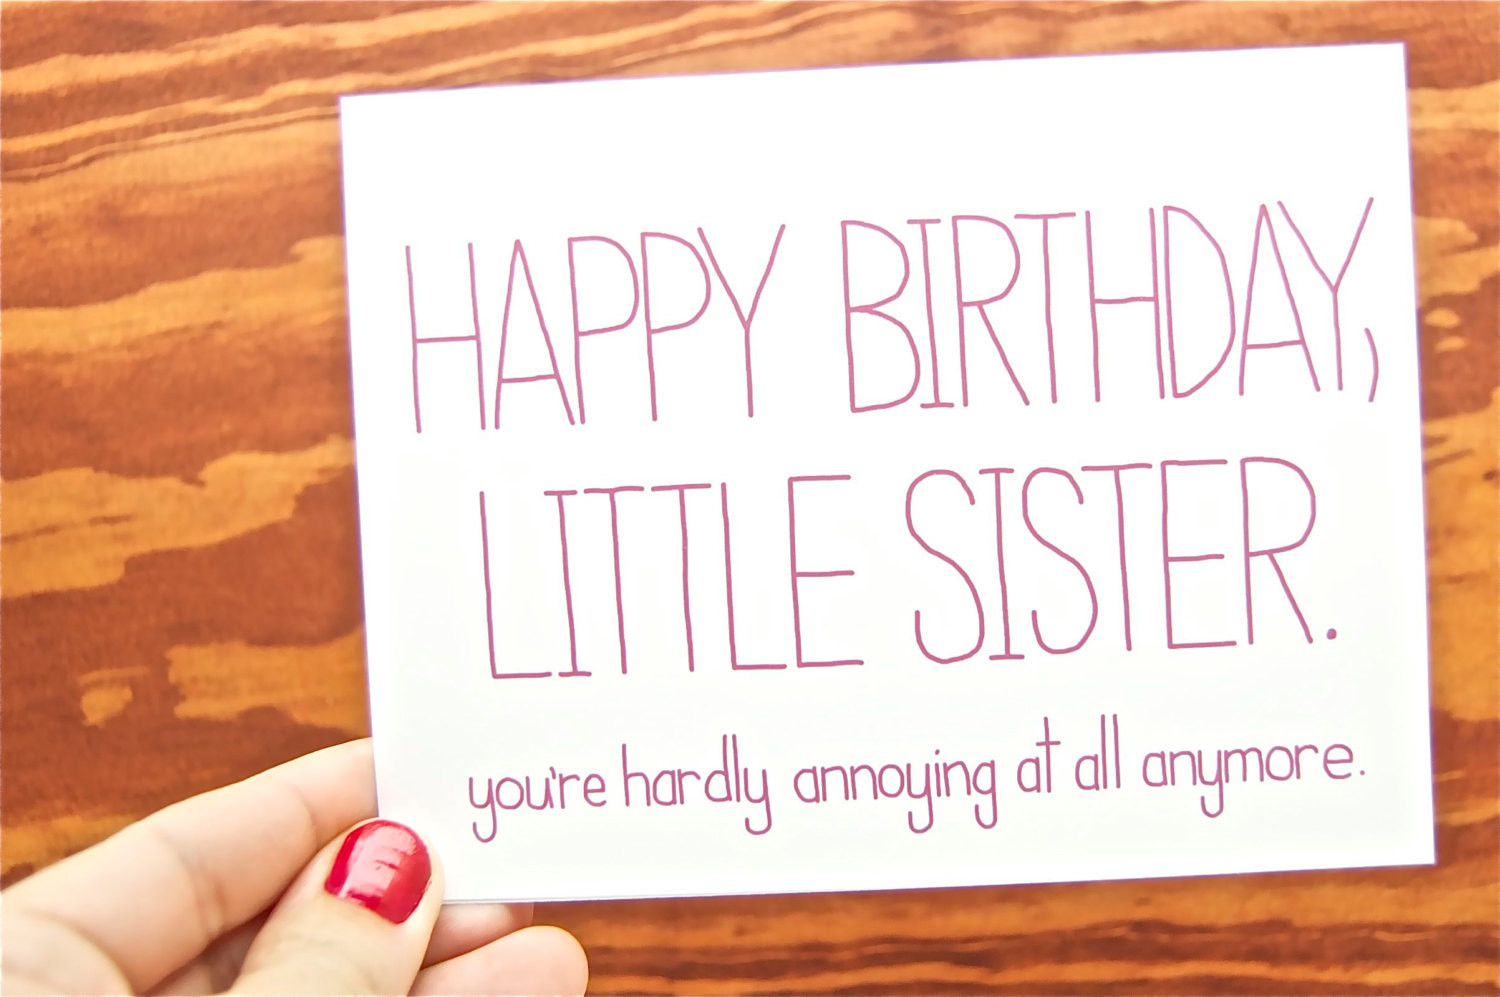 Happy Birthday Sister Quotes Funny
 Little Sister Quotes Funny QuotesGram